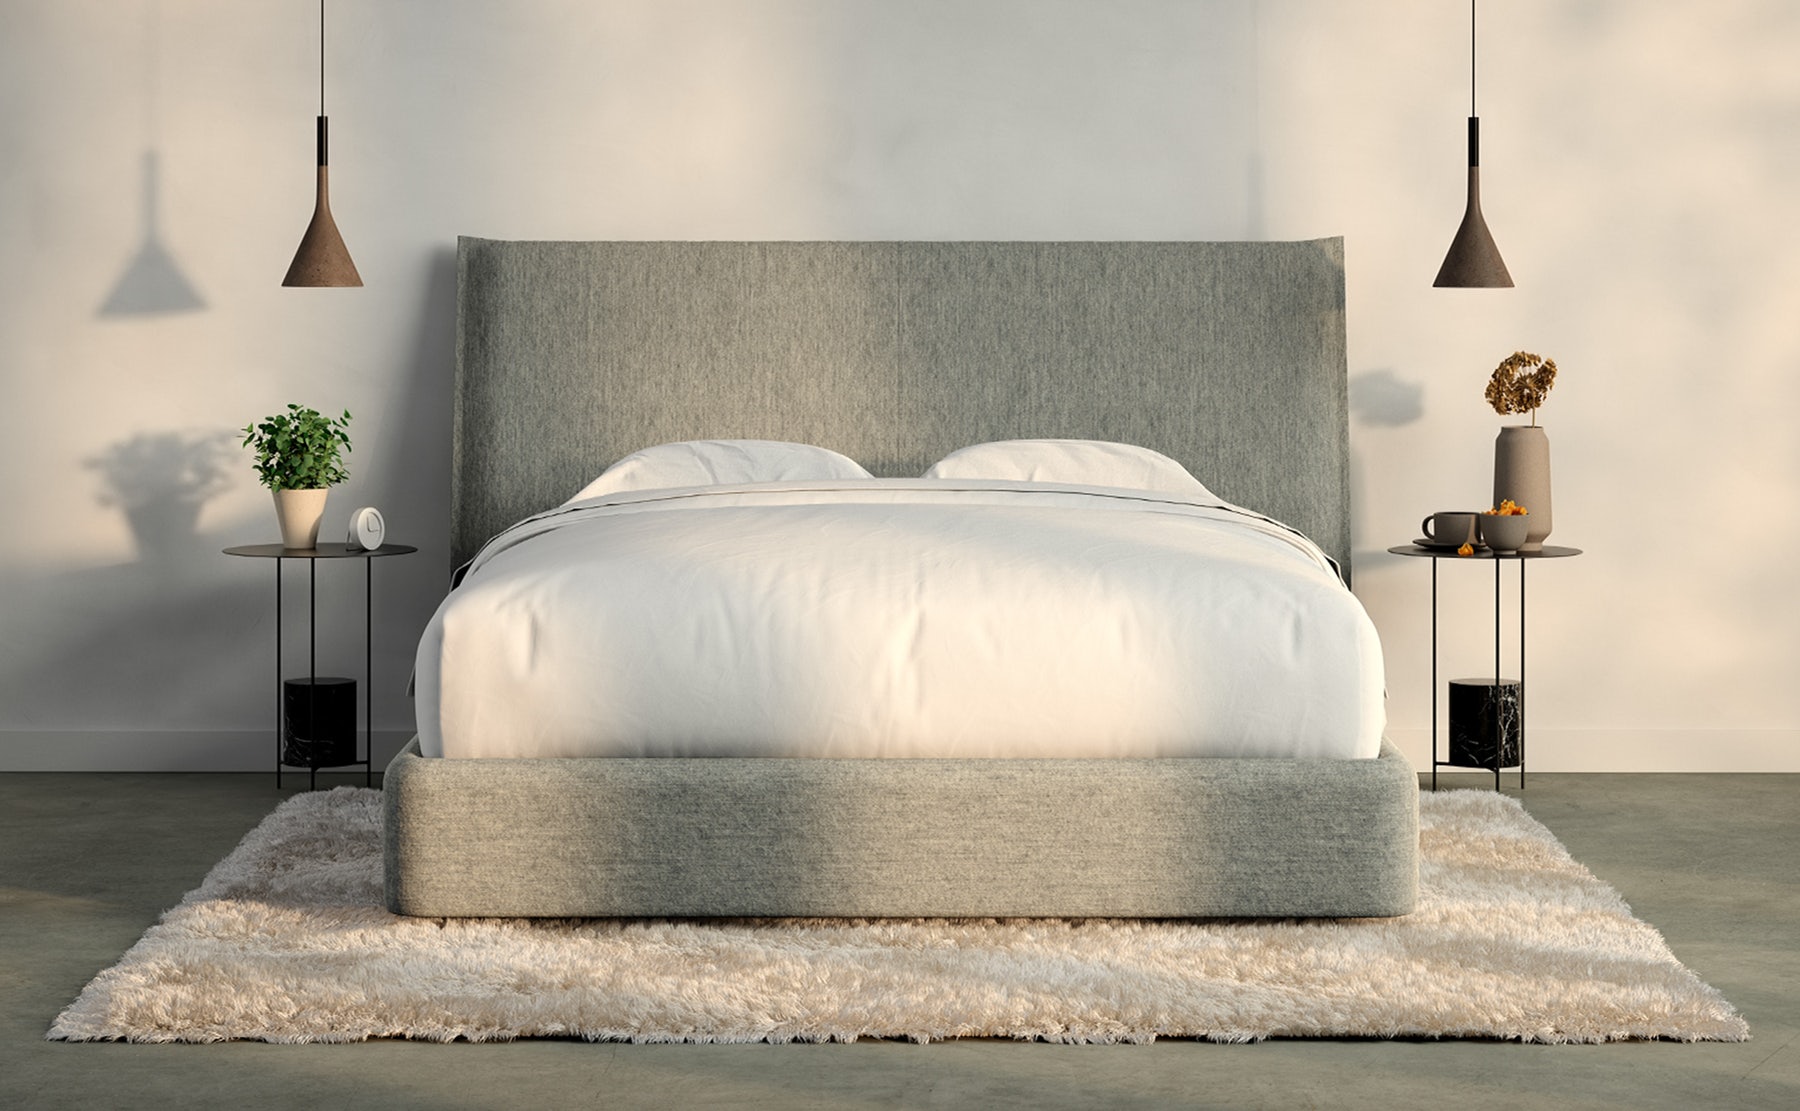 Mattress Sizes And Bed Dimensions Guide, How Long Is A Normal Twin Size Bed